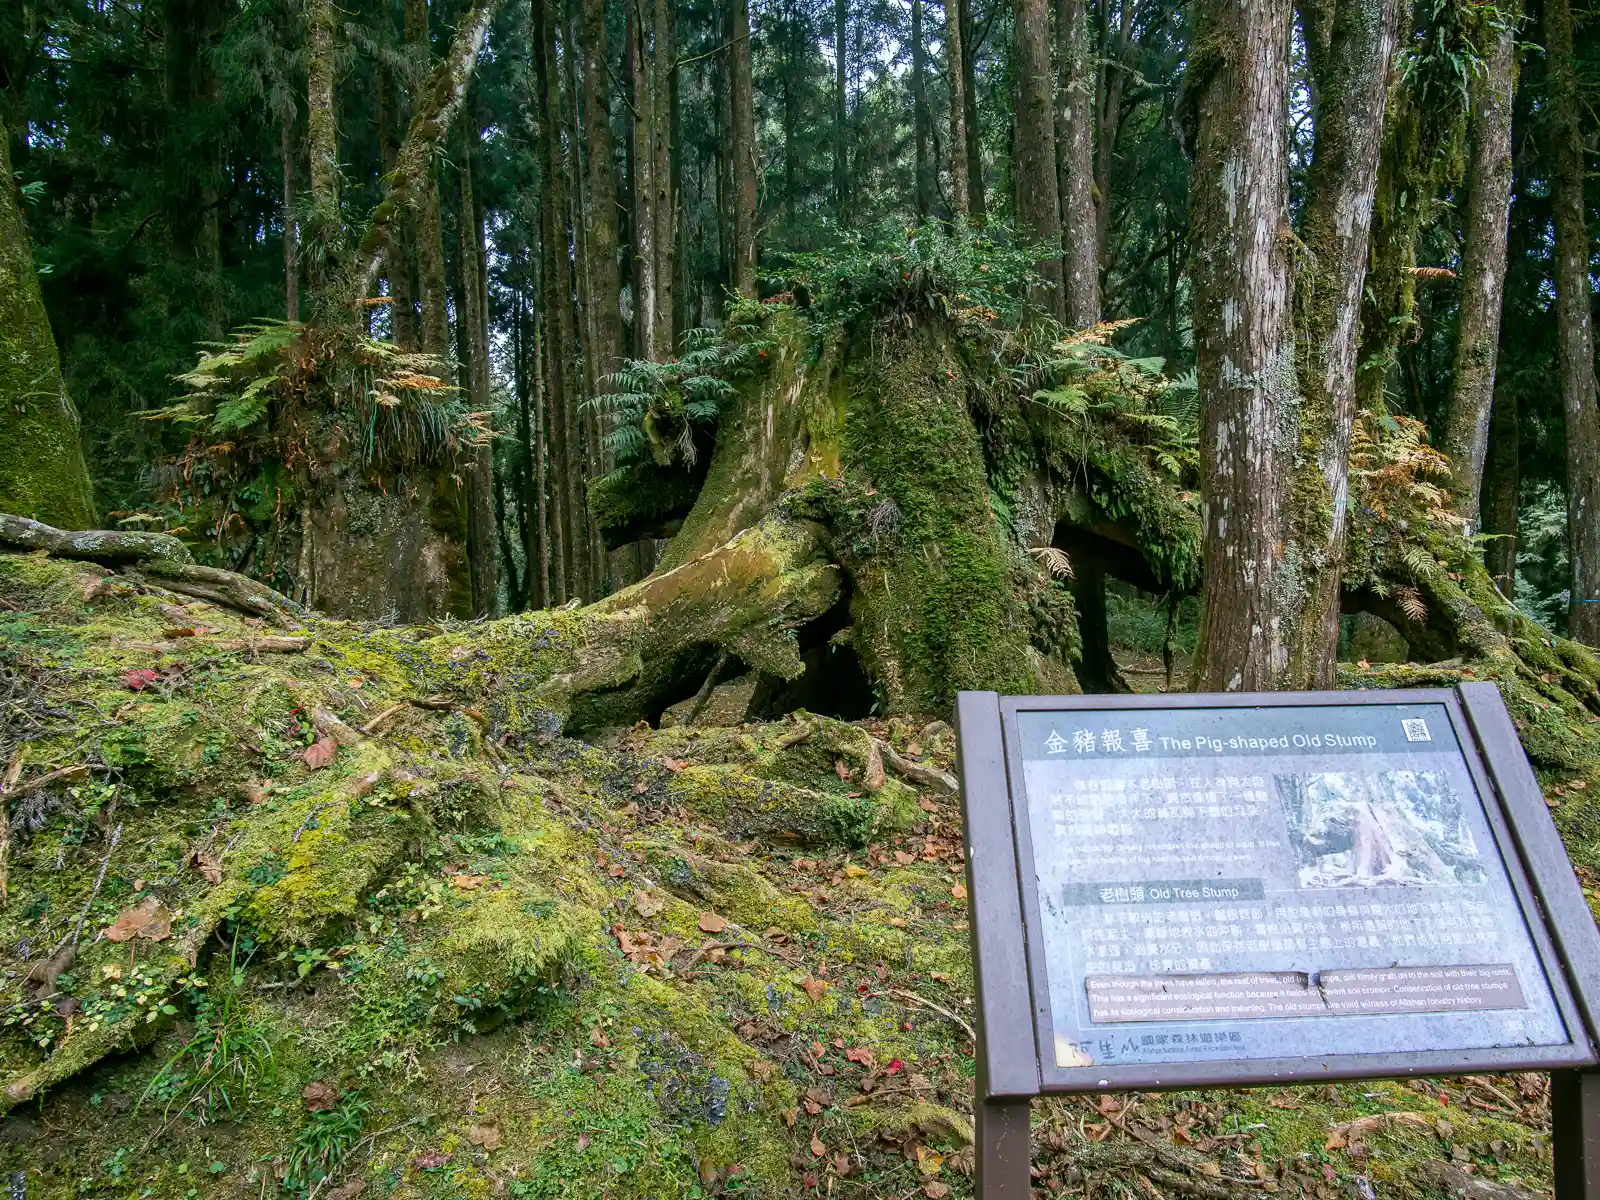 A signboard describes another named ancient tree: the Pig-shaped Old Stump